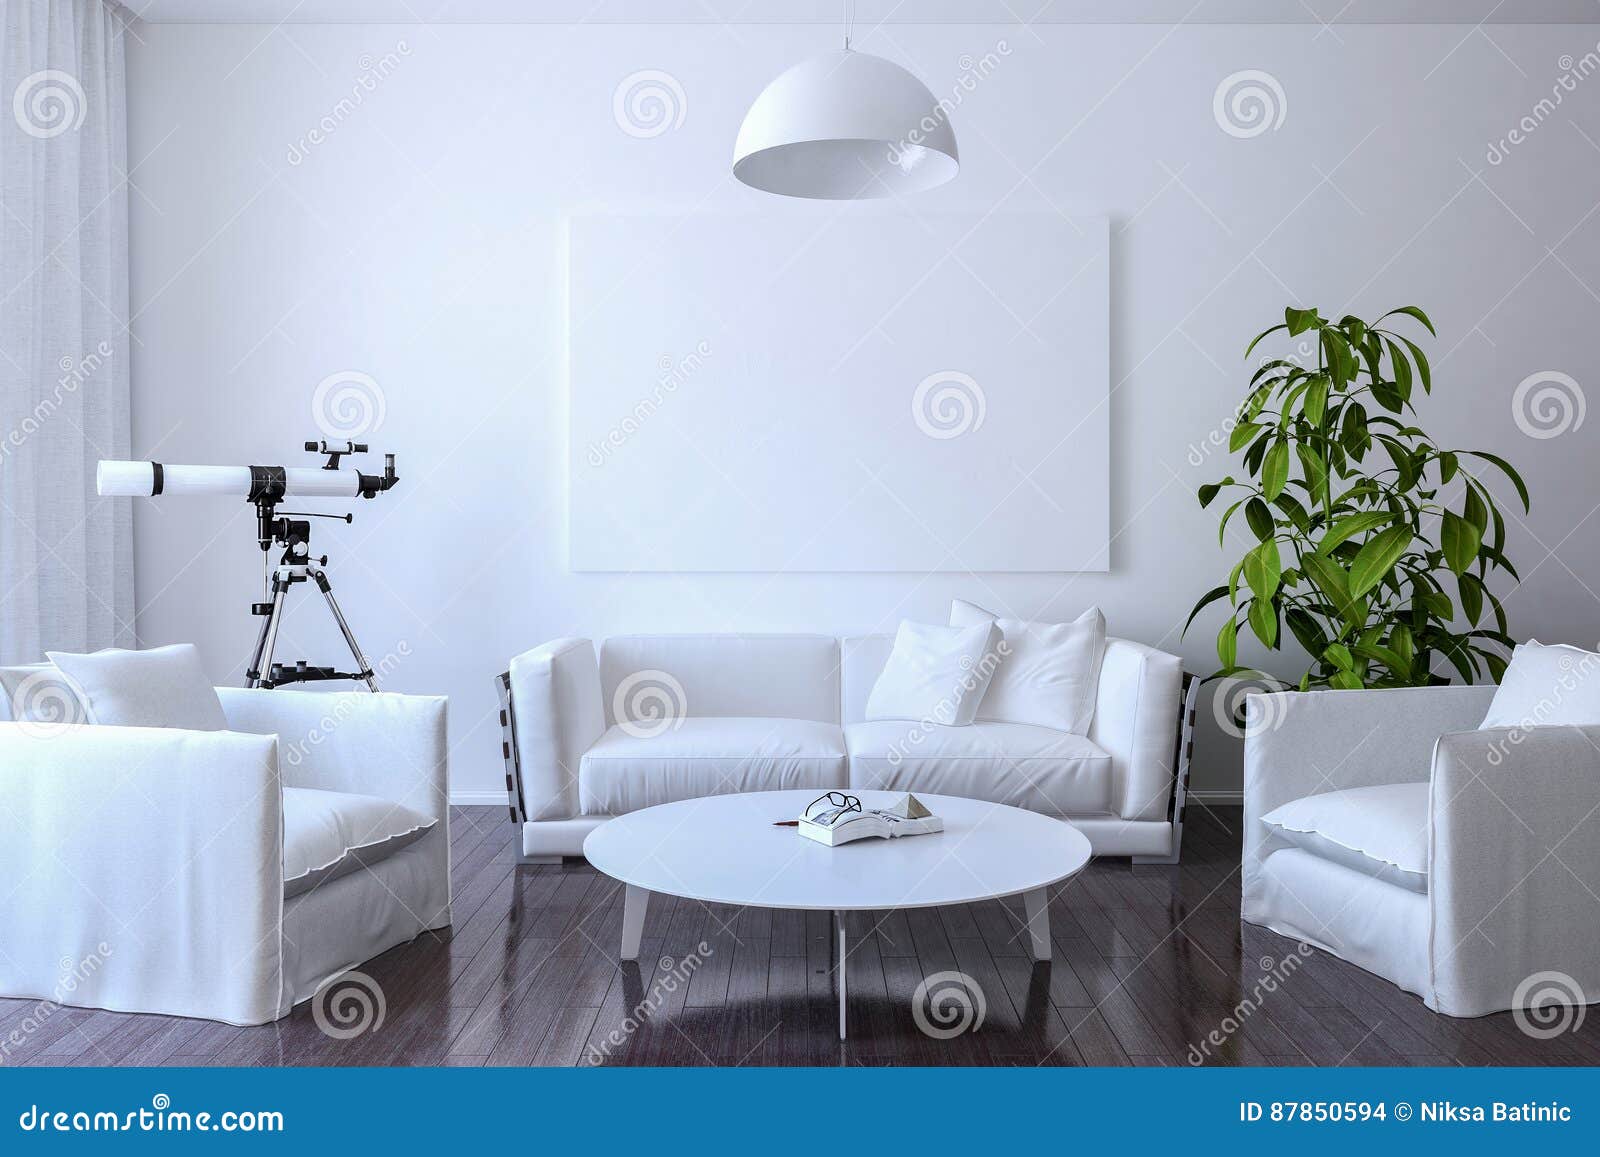 White Furniture In The Living Room A Table A House Plant